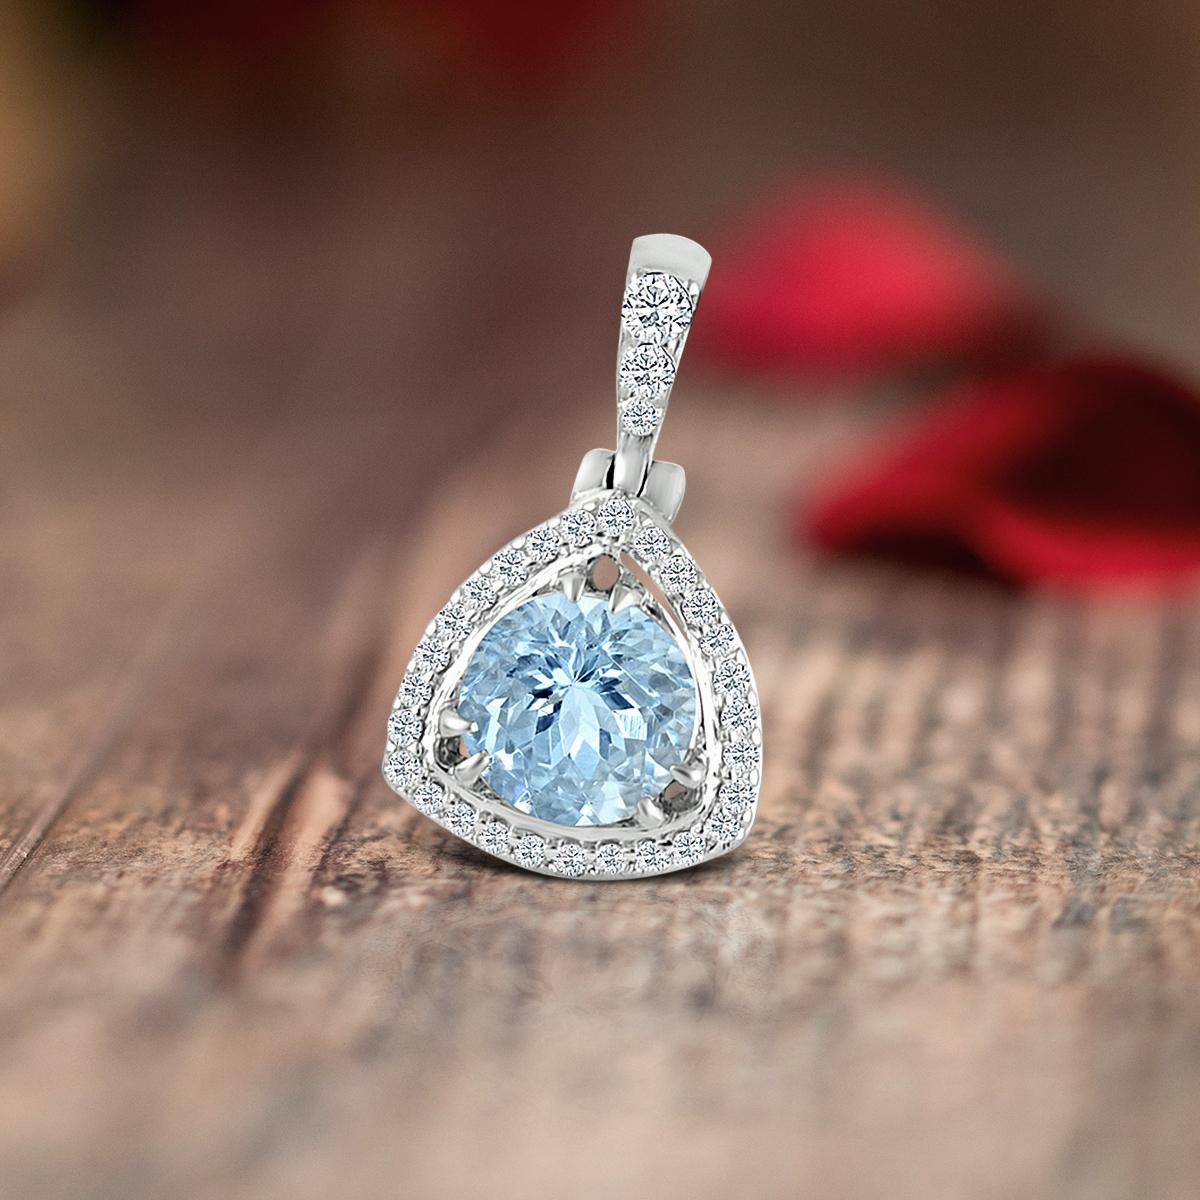 Modern 14k White Gold 0.81cts Aquamarine and Diamond Pendant, Style#TS1279AQP 22053/13 For Sale